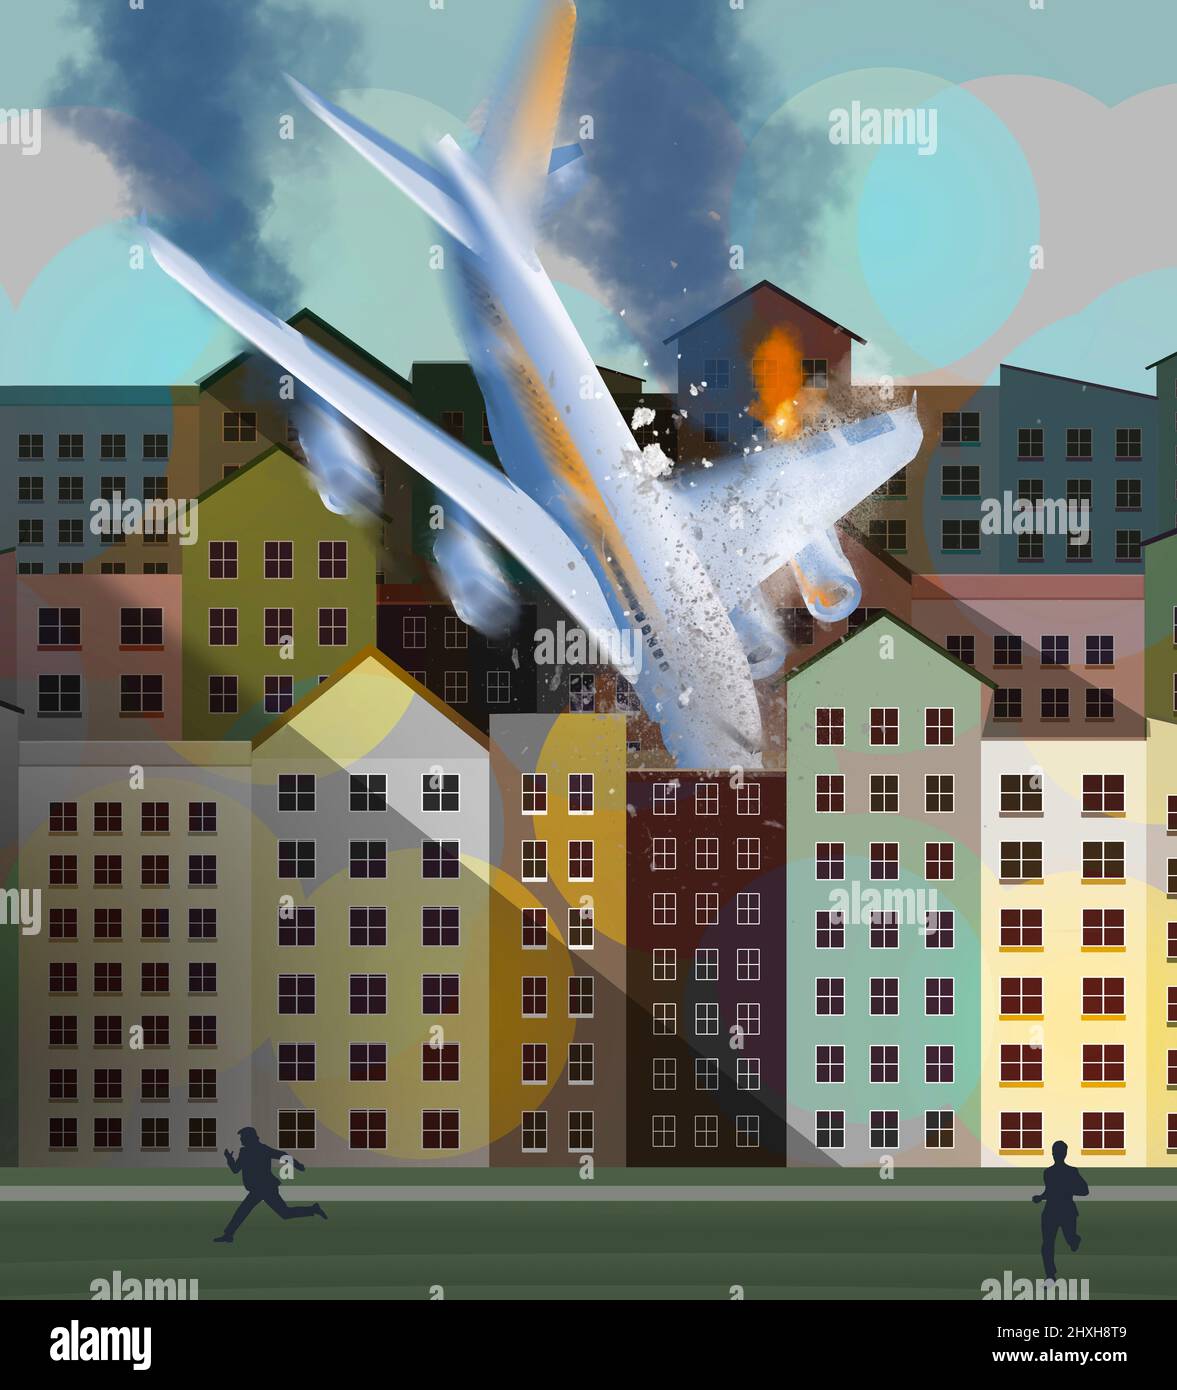 Here is a clean look at an airplane crashing into an urban area in a 3-d illustration that sanitizes the horror a bit. Stock Photo